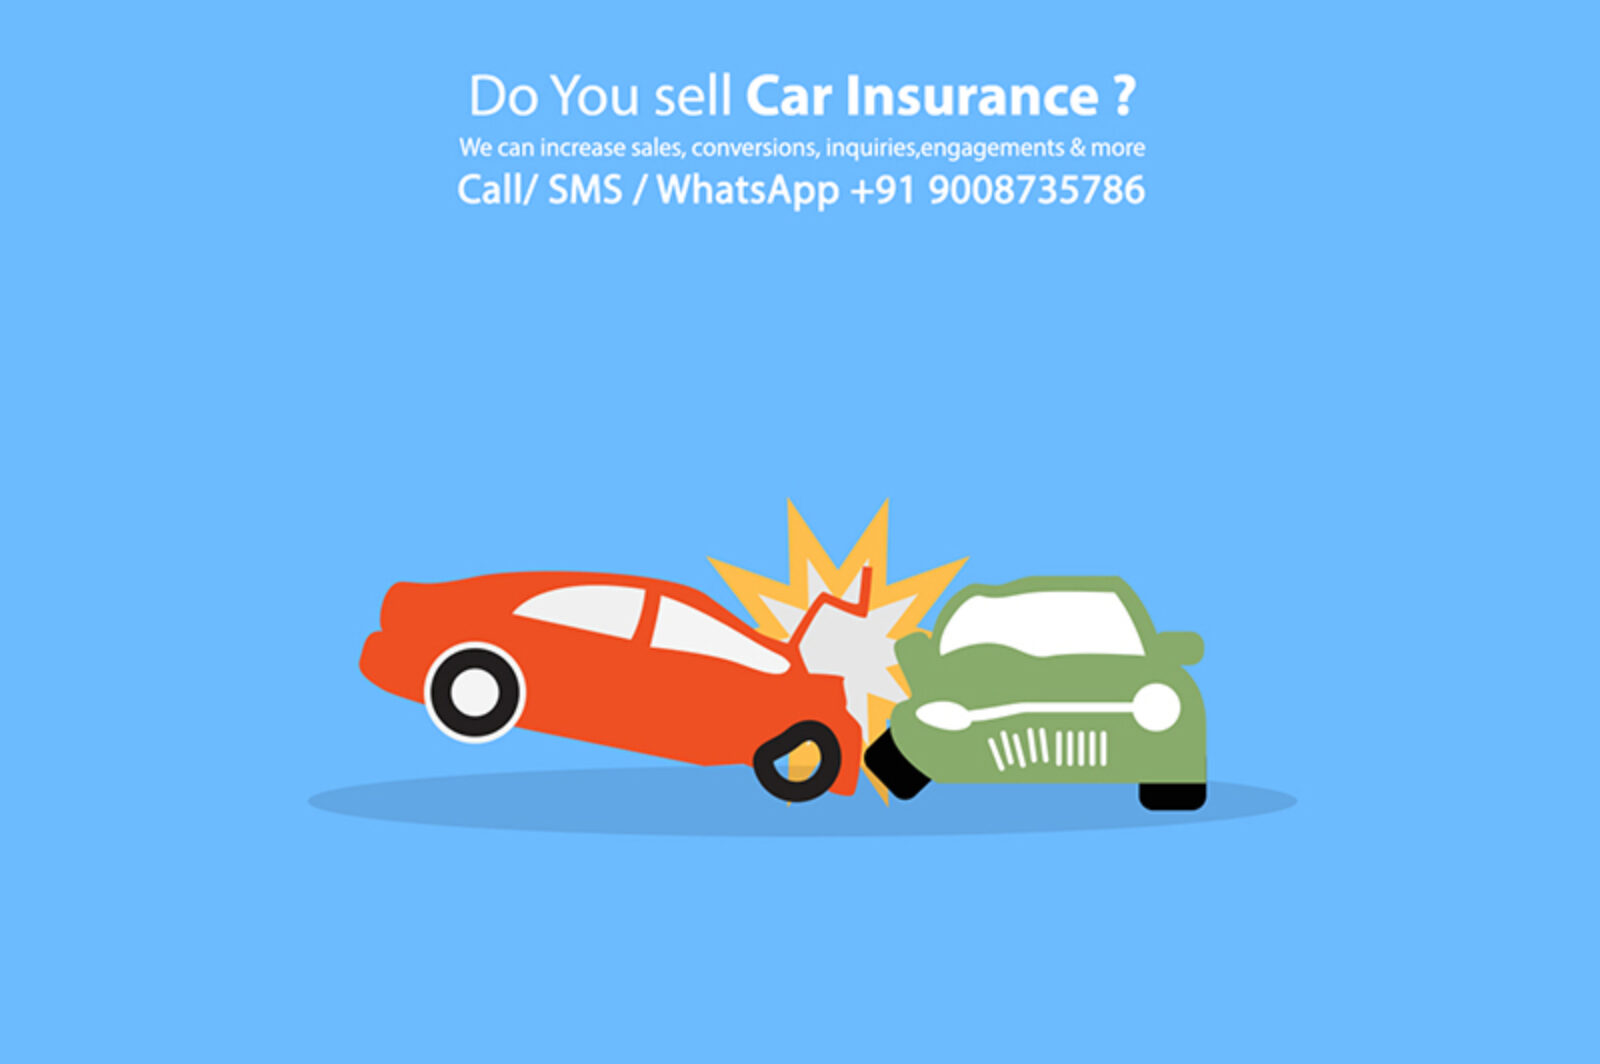 Improve your car insurance business with greater digital marketing services